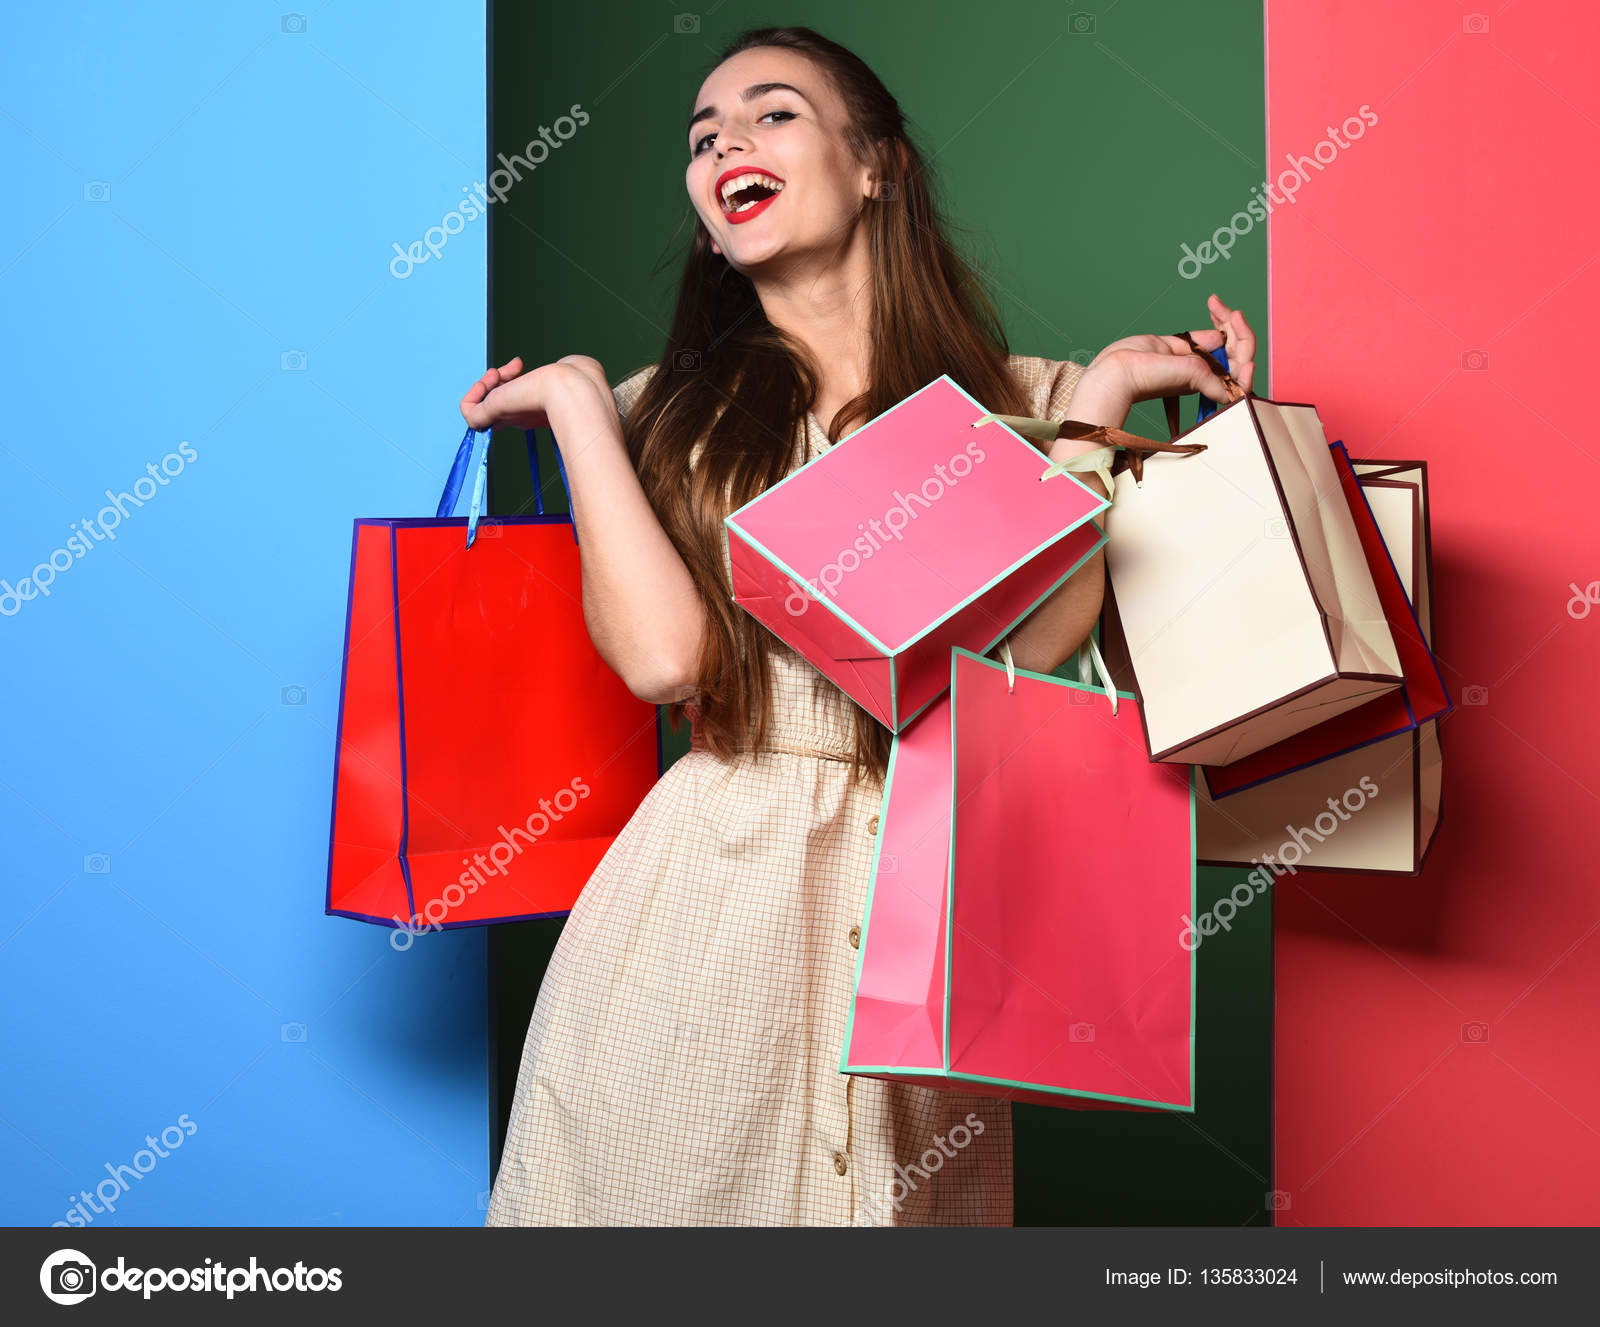 Girl with bags photo